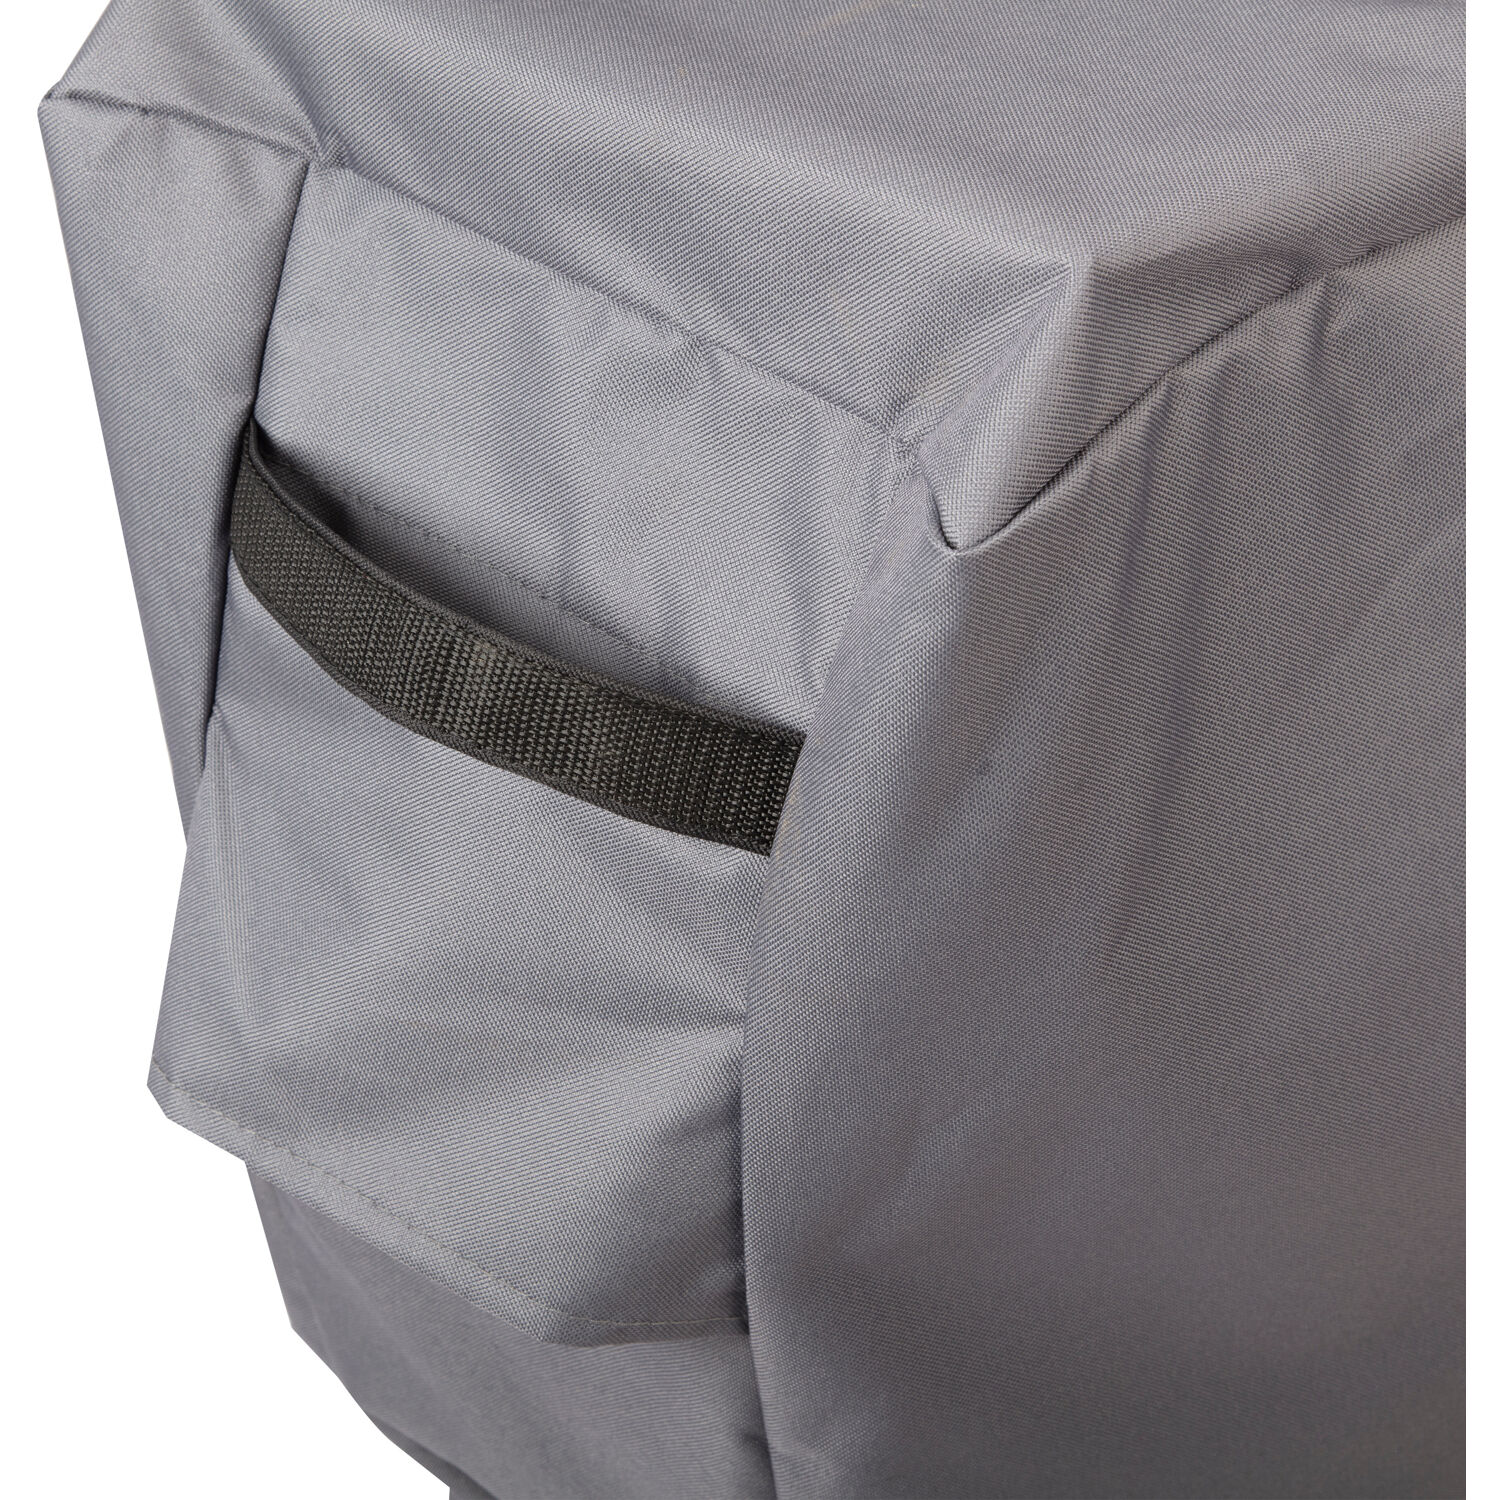 Cuisinart 26-in W x 47-in H Gray Pellet Grill Cover in the Grill Covers ...